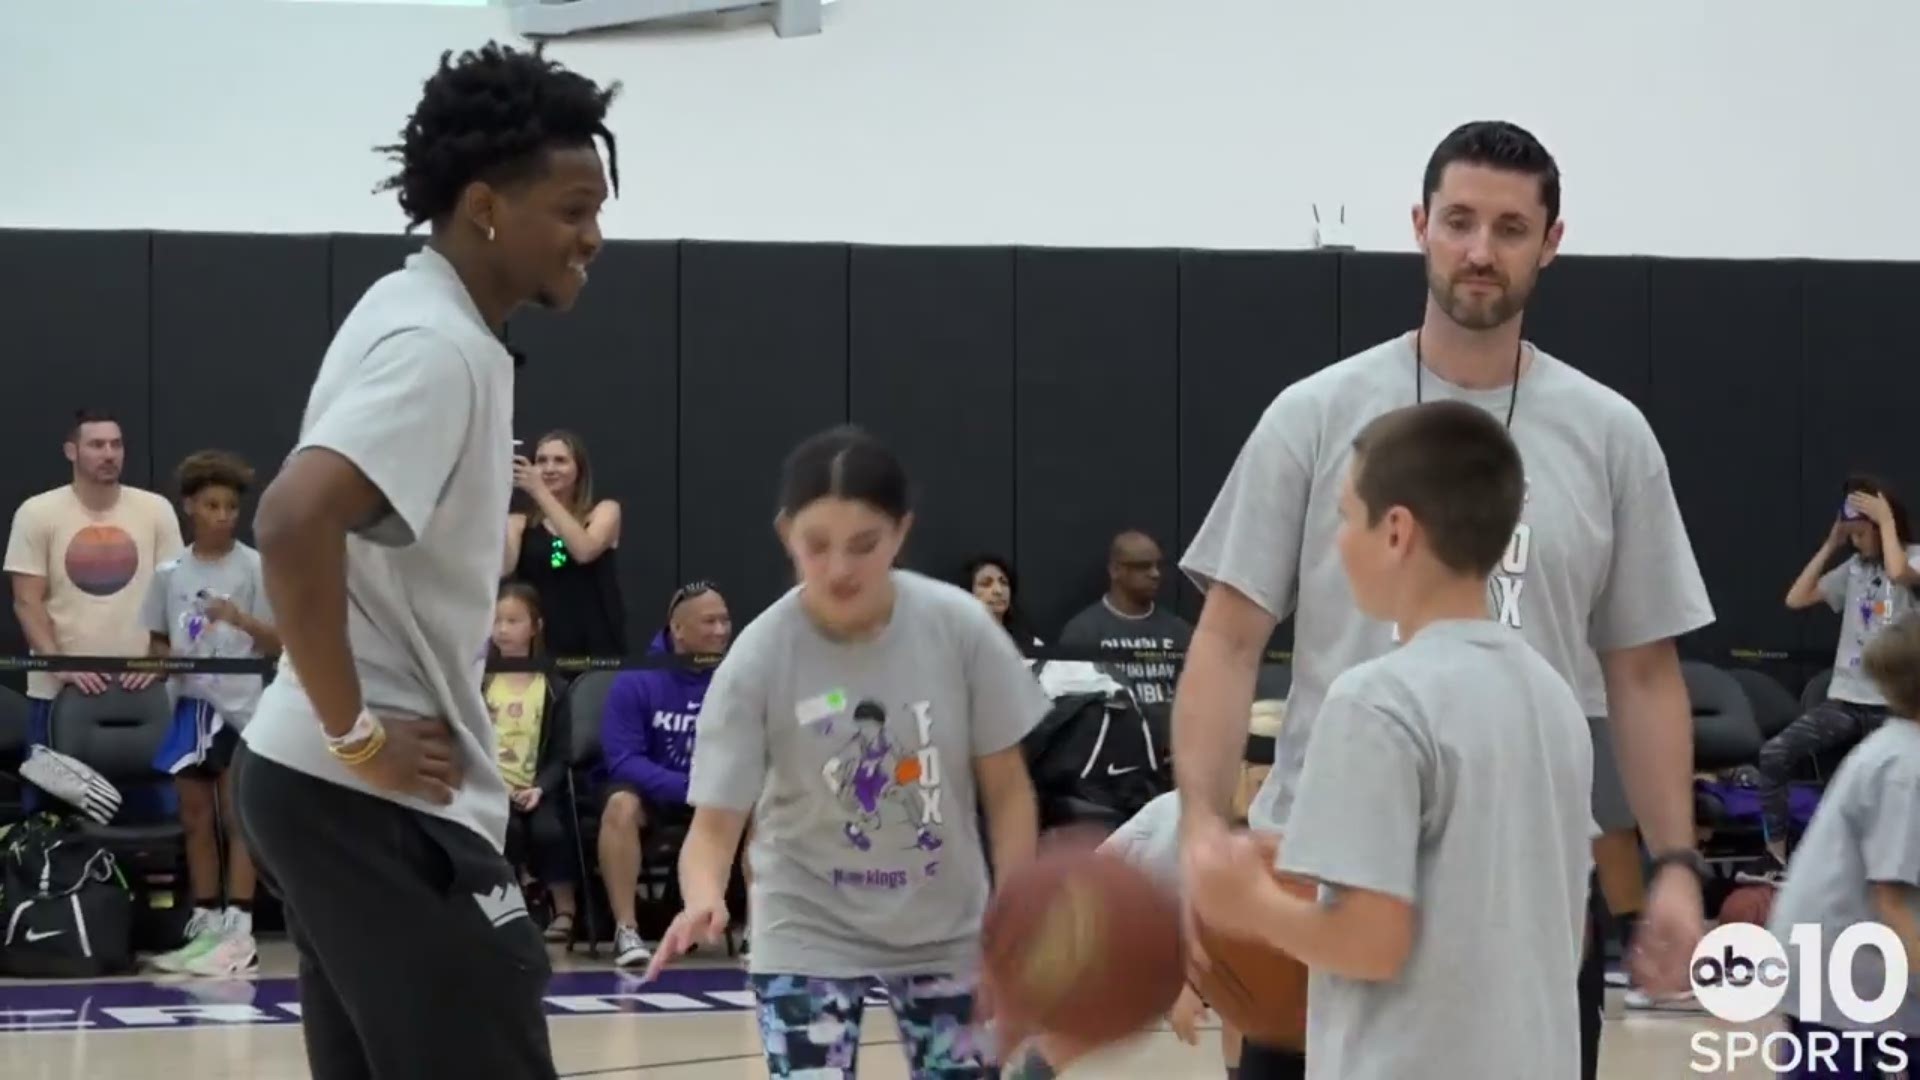 During De'Aaron Fox's basketball camp in Sacramento, the Kings point guard interacts with kids who ask about the team's new coach and even playoff chances for next year. He even teaches one young man a lesson about what happens when you bring a Stephen Curry basketball to his camp.